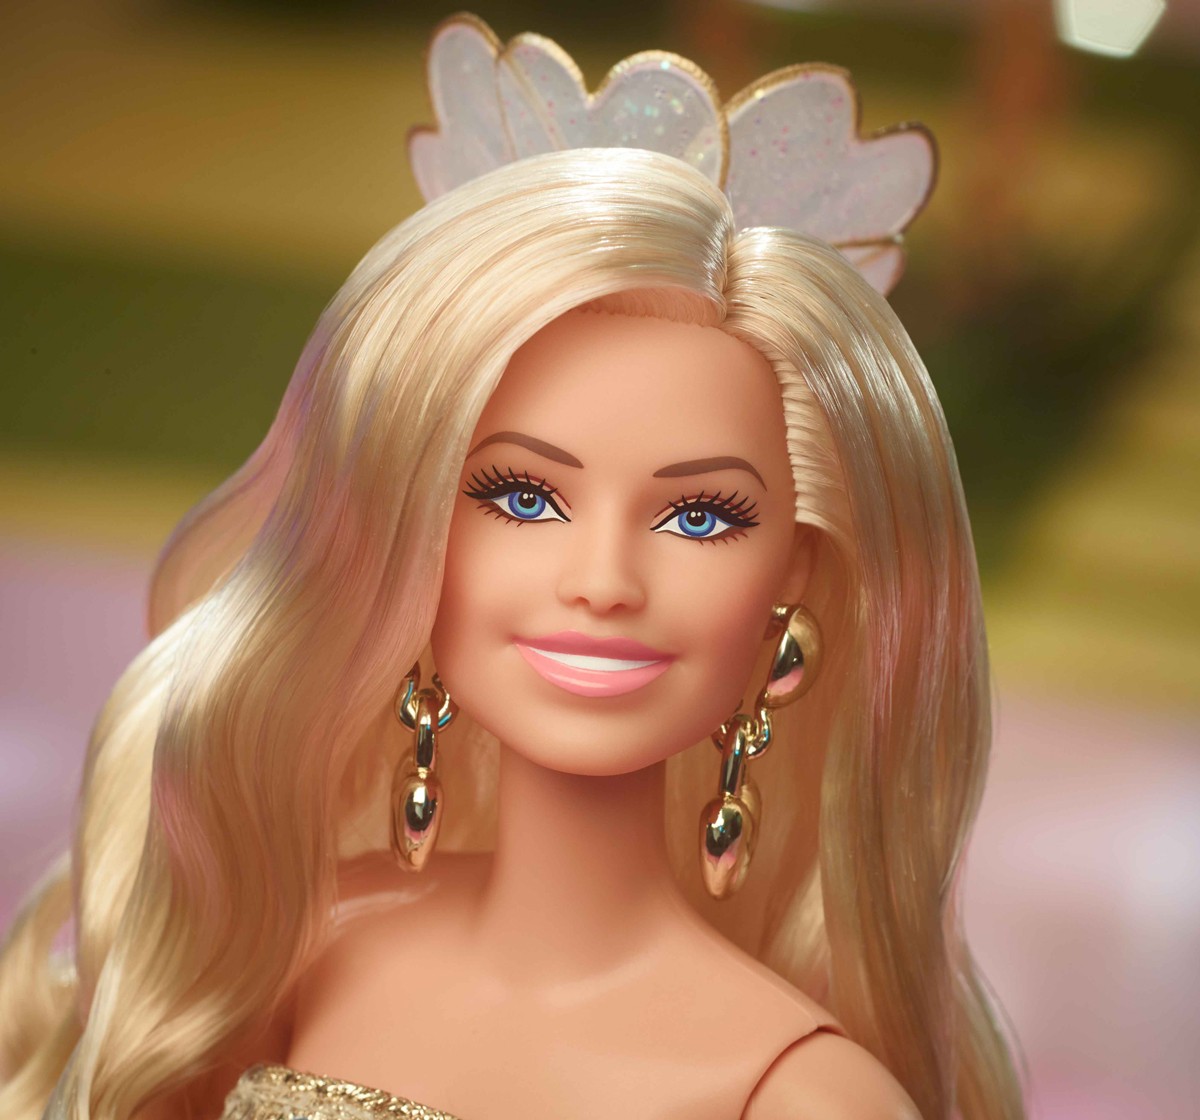 Barbie The Movie Doll, Margot Robbie as, Collectible Doll Wearing Gold Disco Jumpsuit with Glossy Curls and Golden Heels, Kids for 3Y+, Multicolour, Assorted